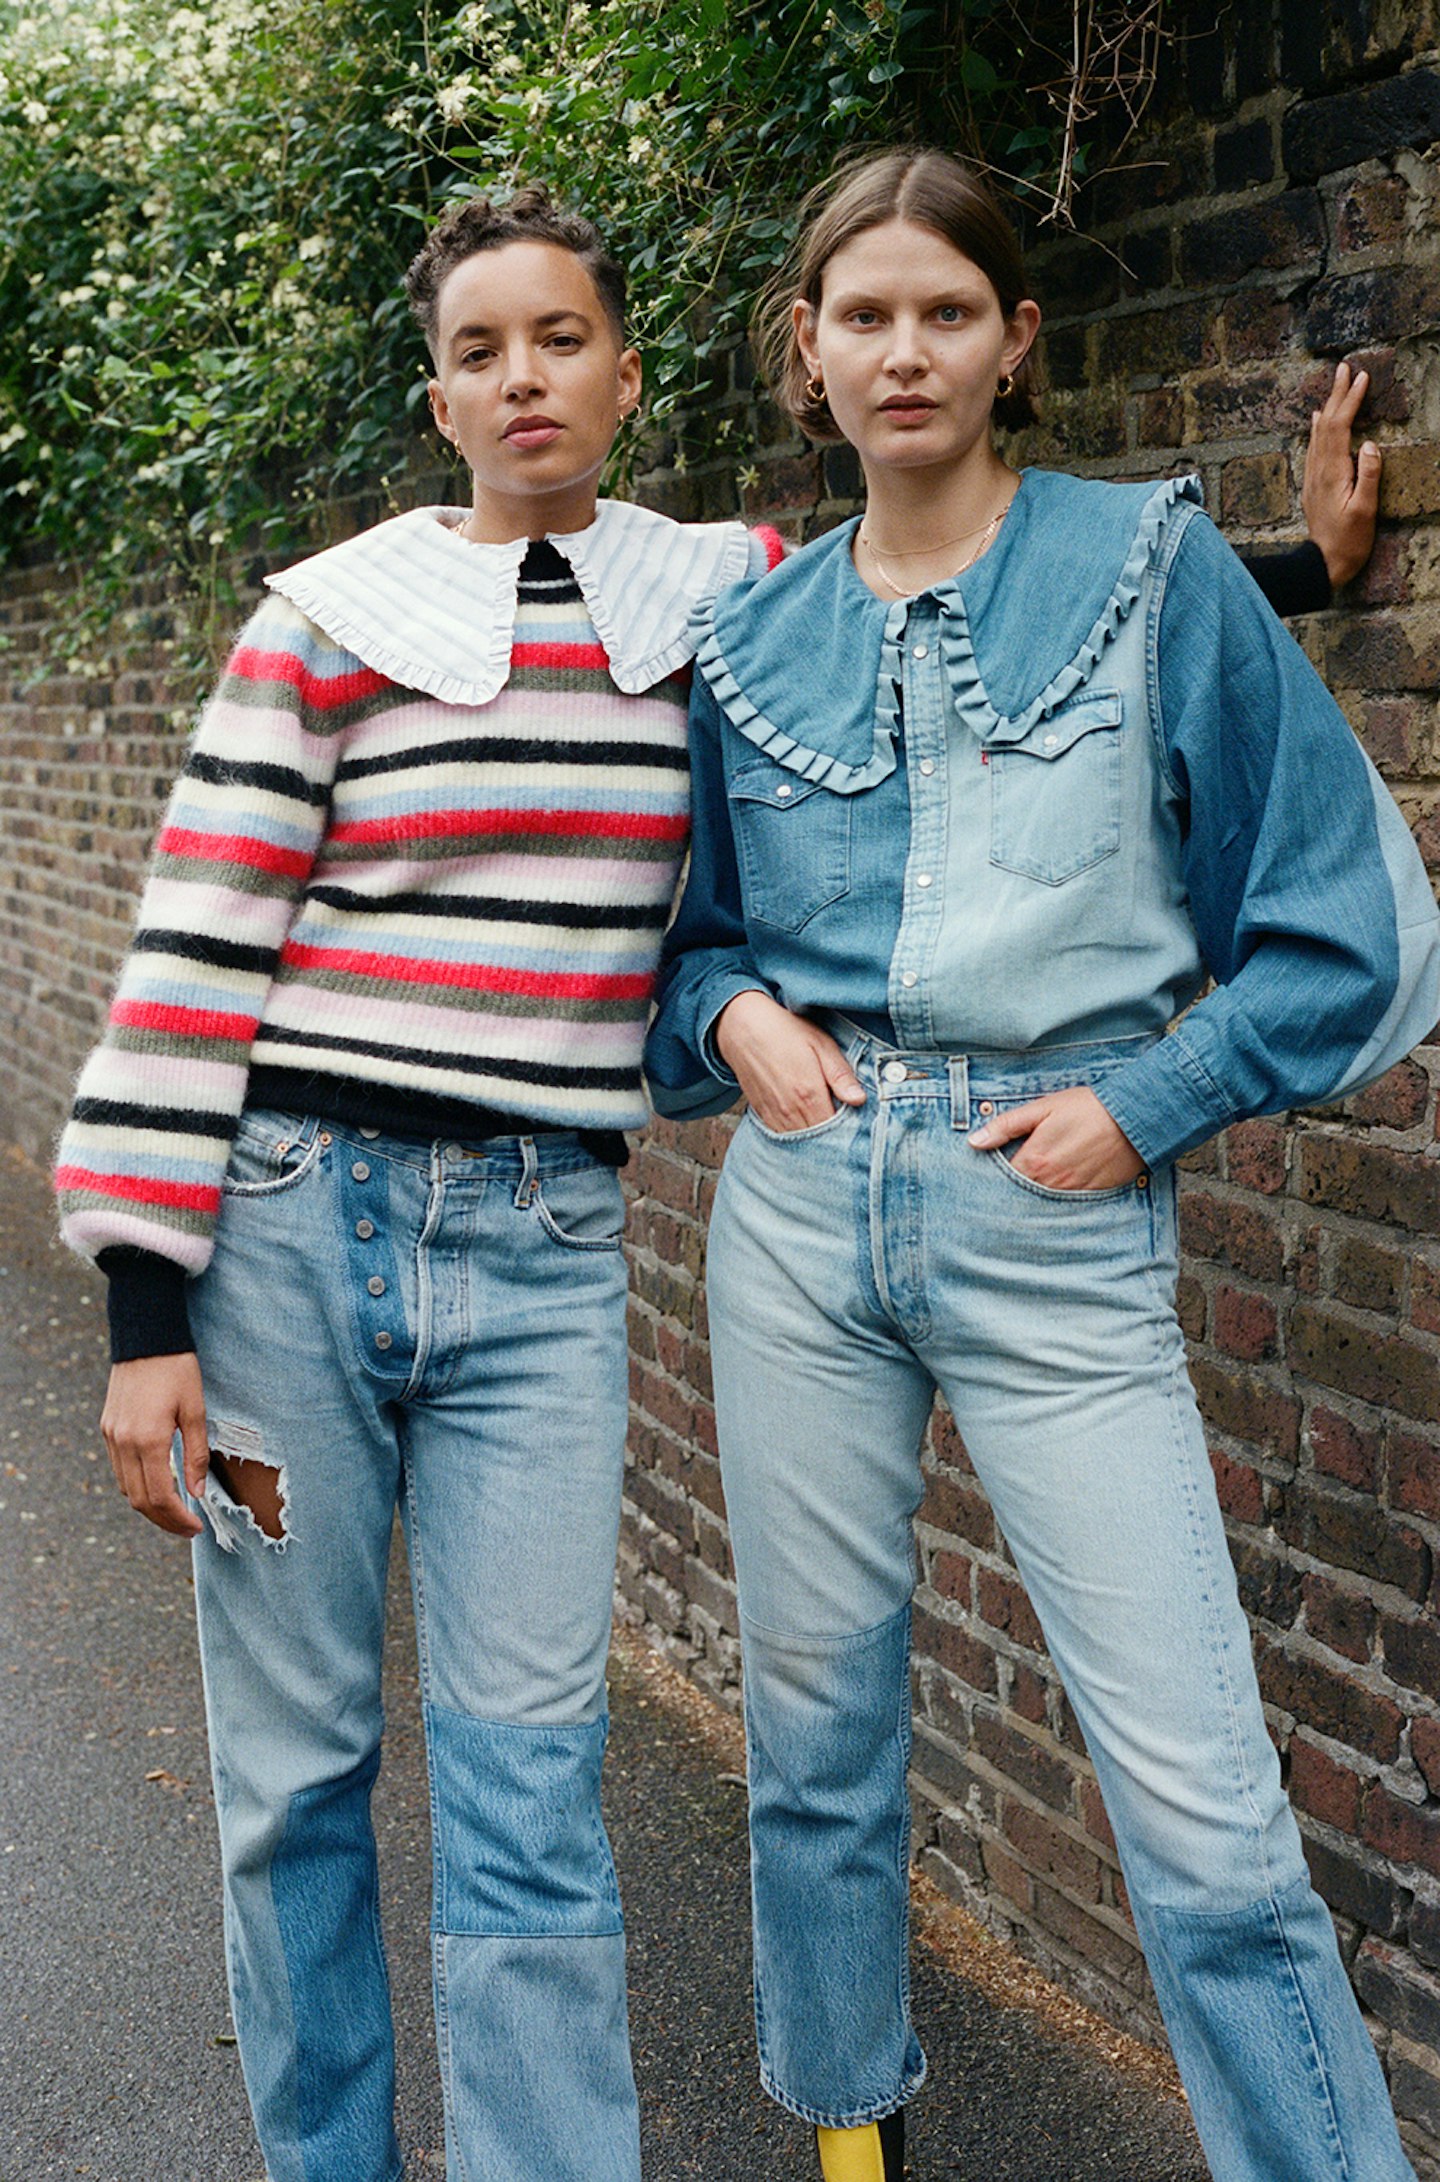 Phoebe Collings-James and Victoria Sekrier in the Ganni x Levi's Love Letter collection